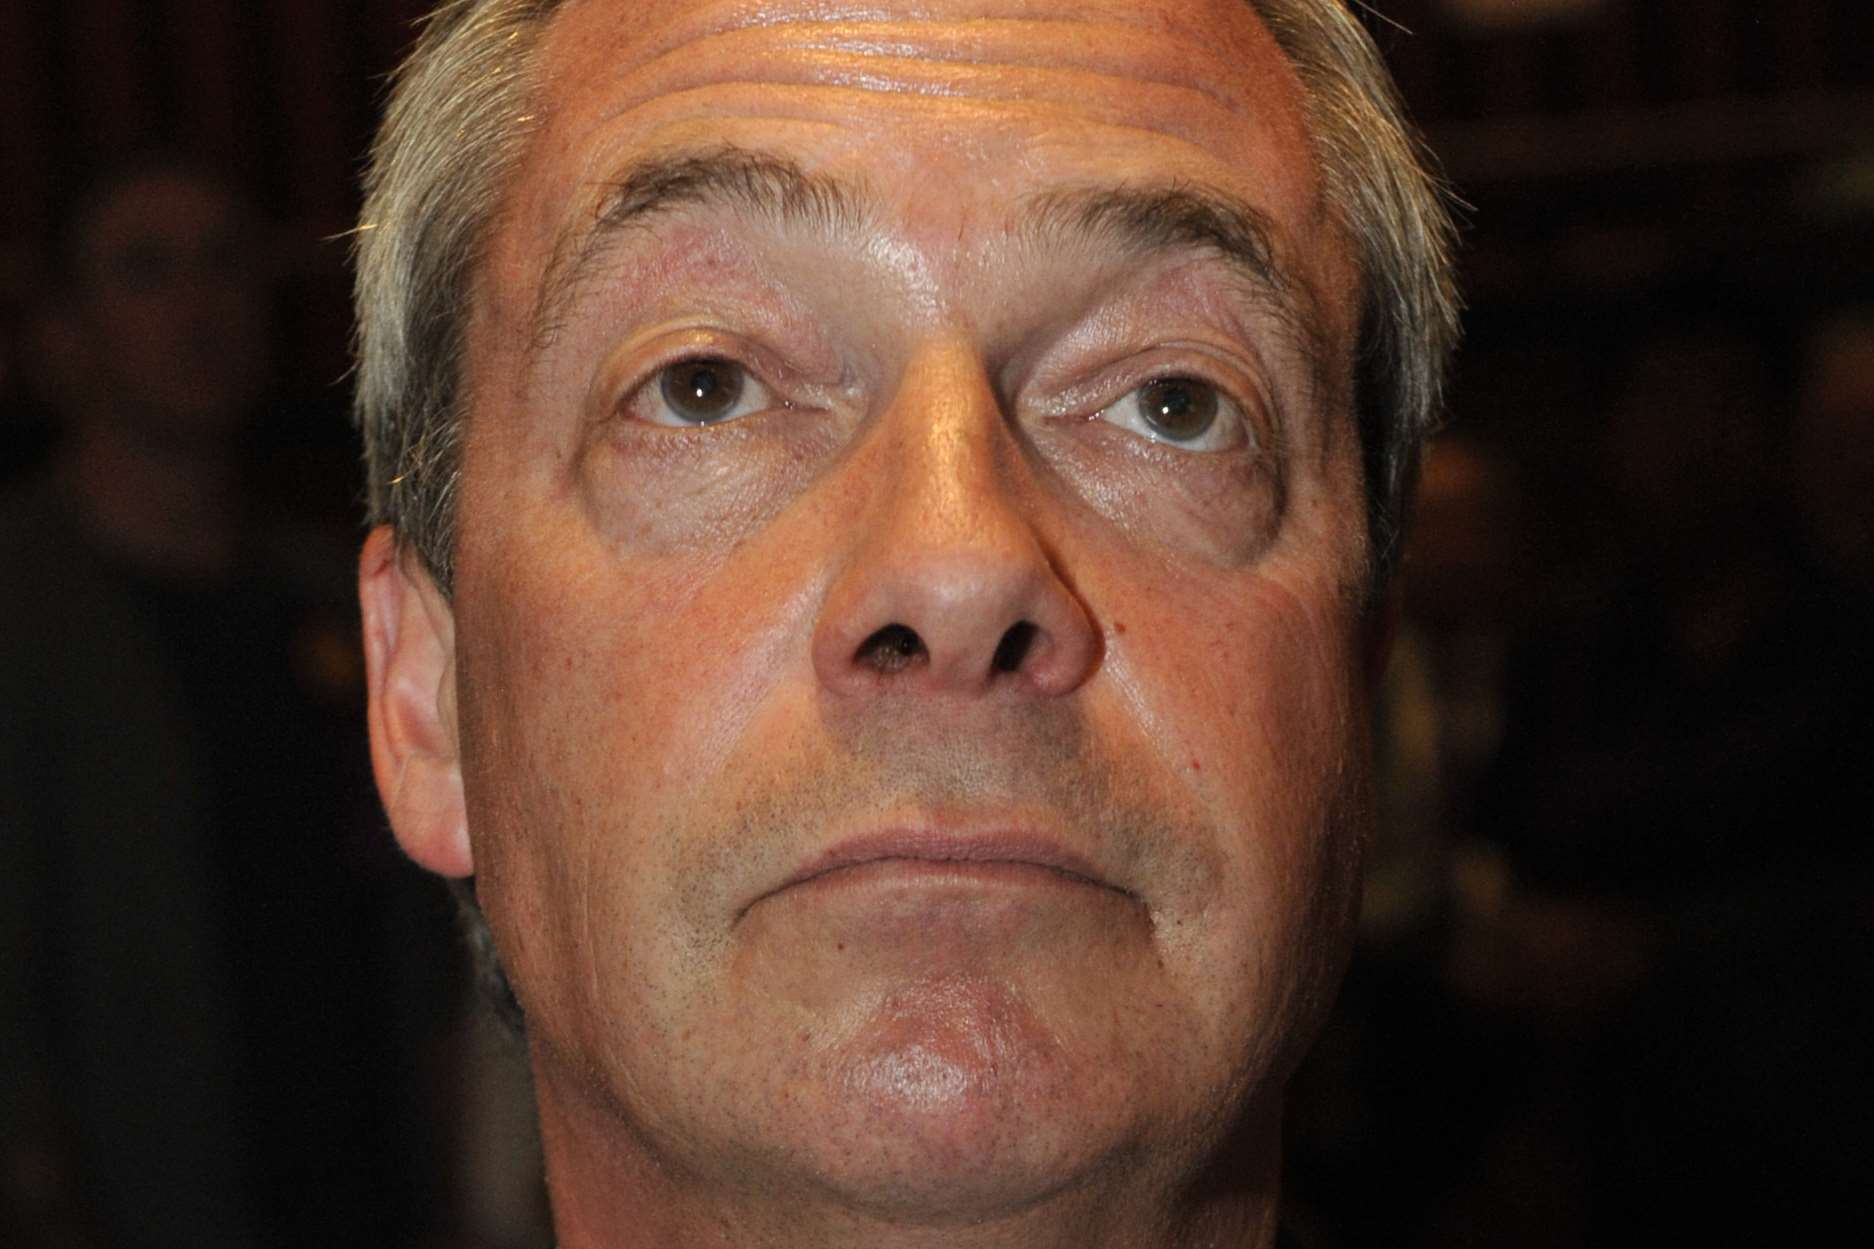 Ukip leader Nigel Farage is to stand down